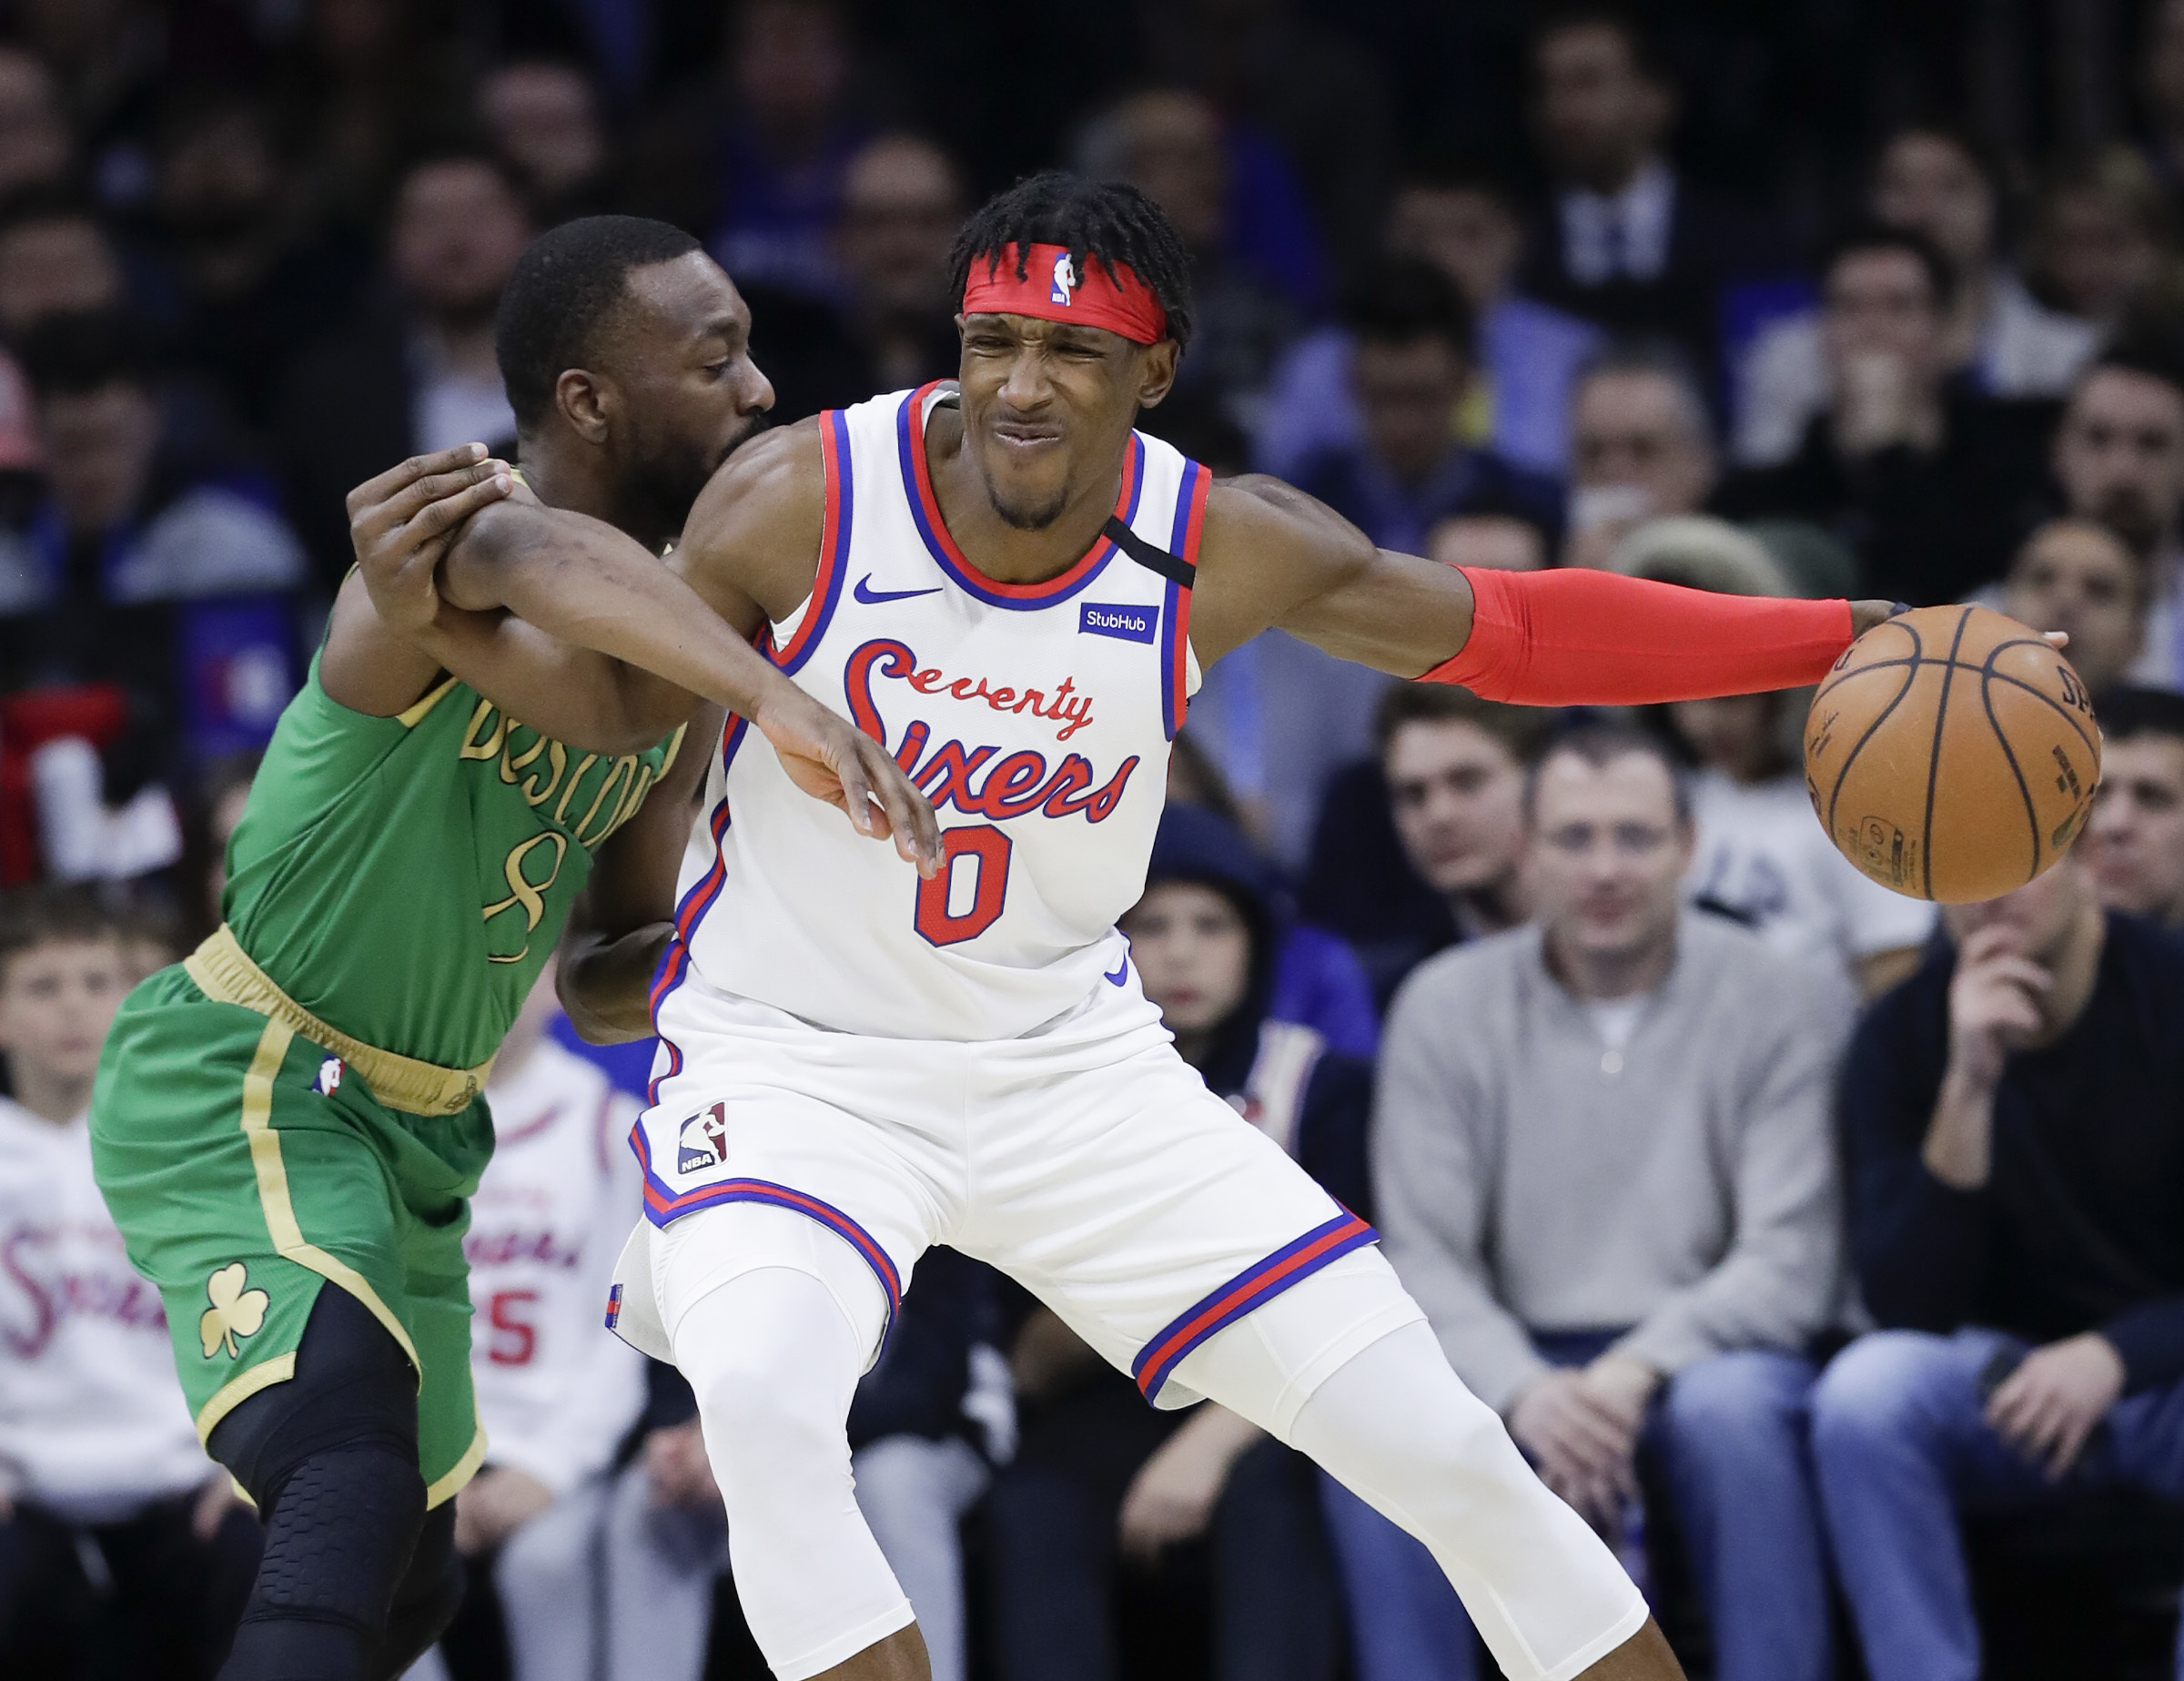 Sixers vs. Celtics in the NBA playoffs: What to know - Axios Philadelphia